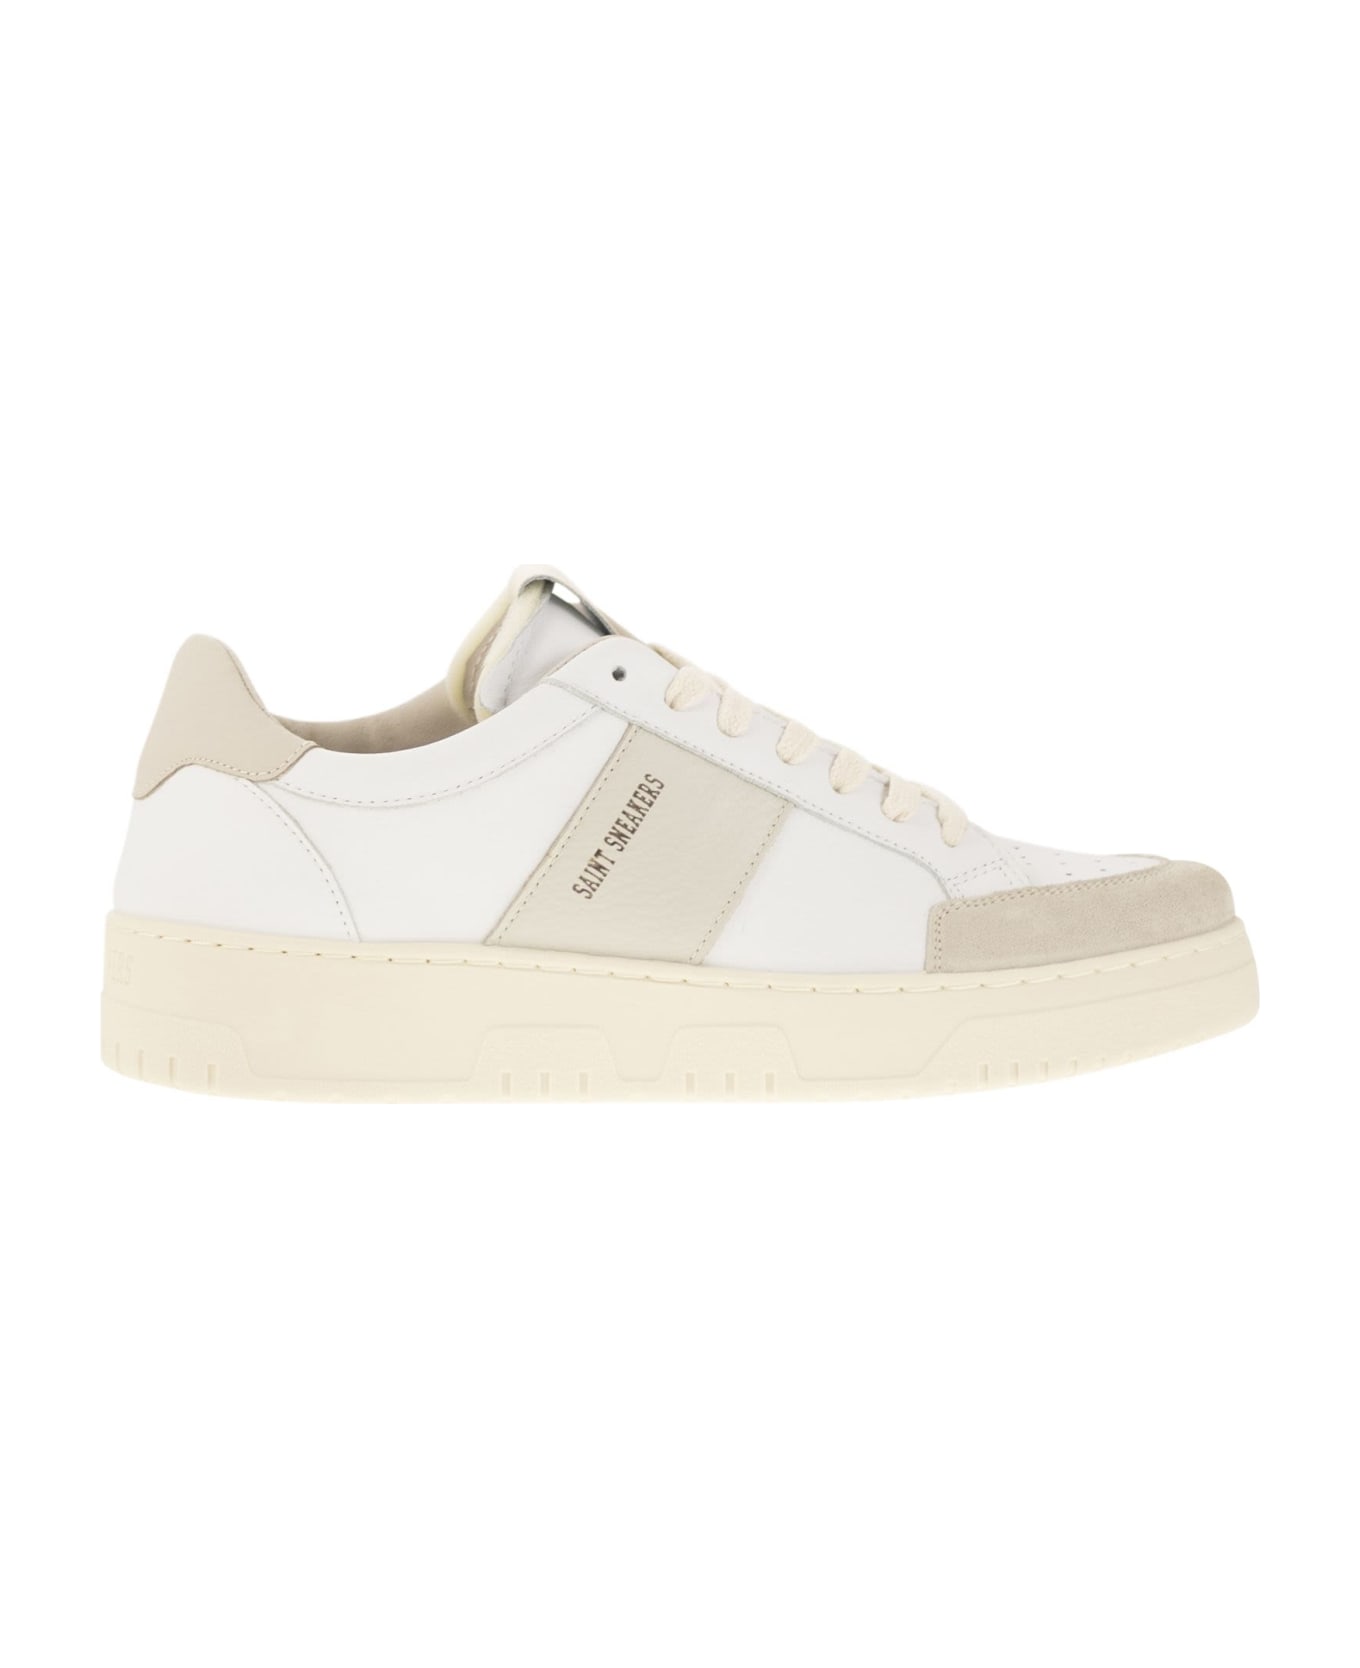 Saint Sneakers Sail - Leather And Suede Trainers - White スニーカー